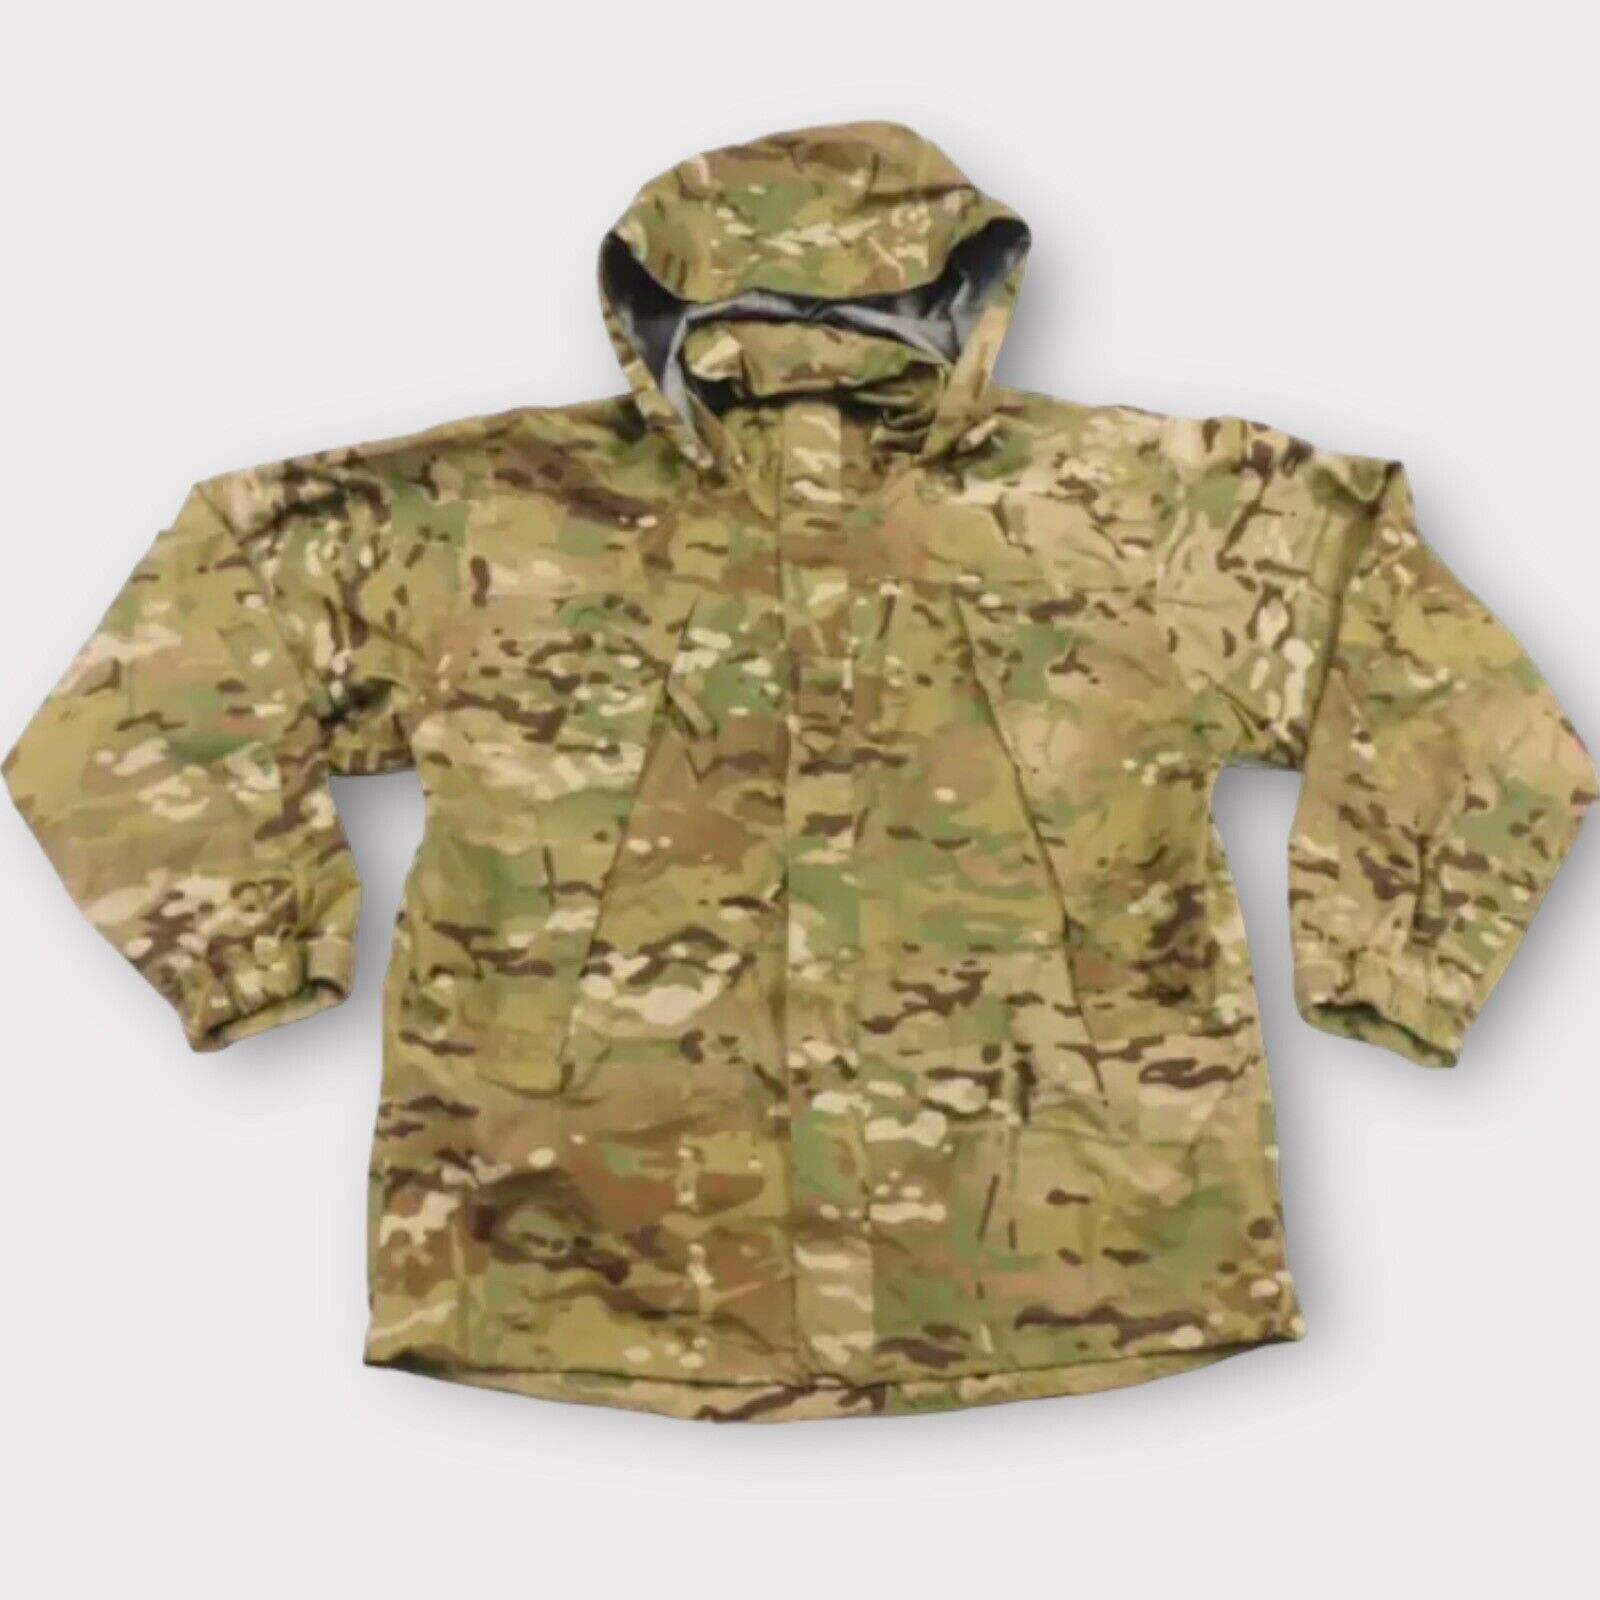 Extreme Cold Wet Weather Jacket Small-Reg Gen III Layer 6 Camo OCP Coat GUC